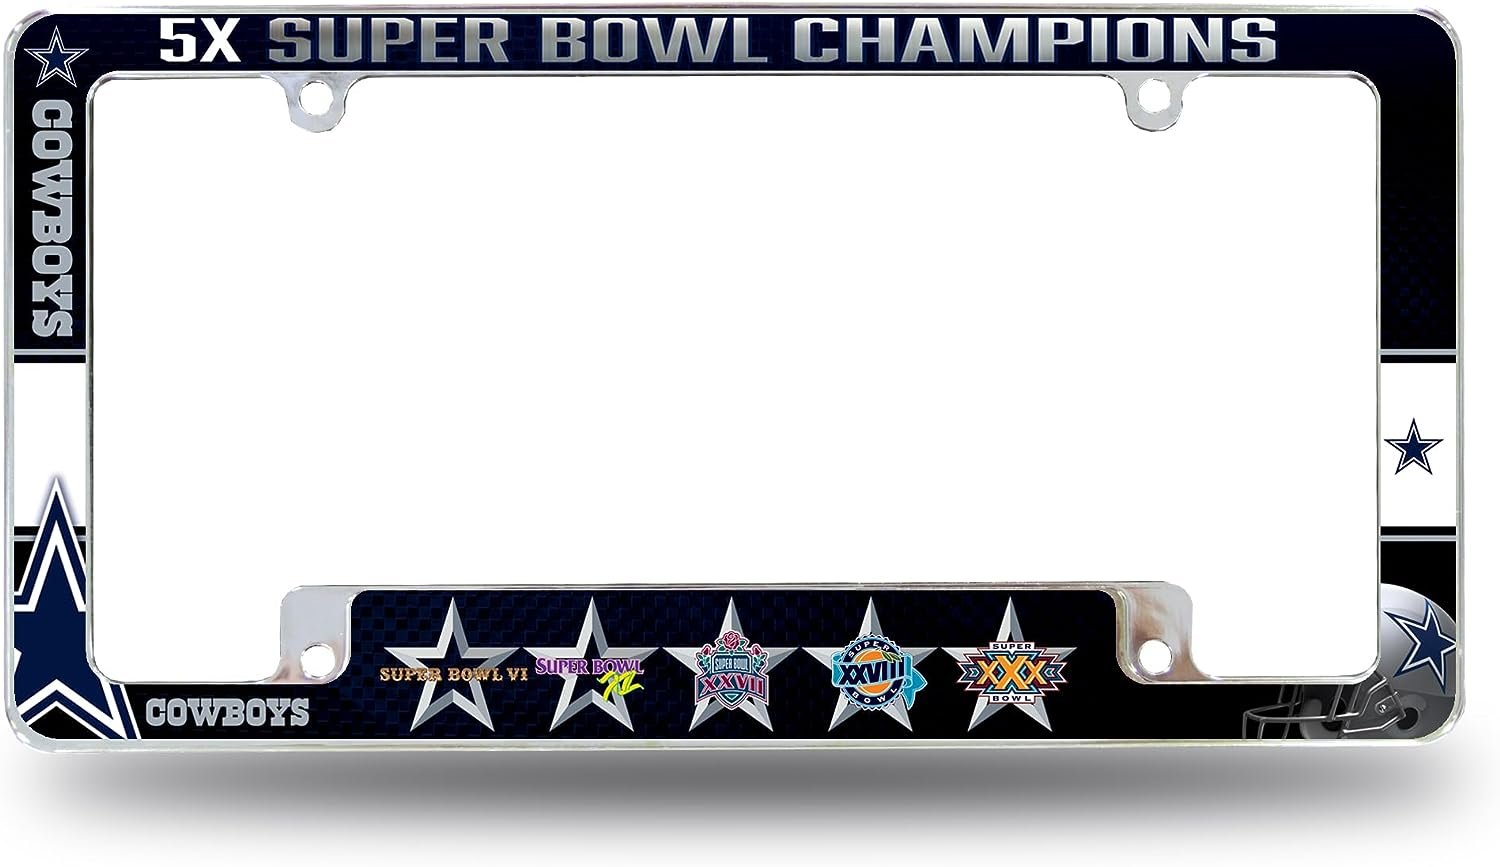 Dallas Cowboys 5-Time Champions Metal License Plate Frame Chrome Tag Cover Alternate Design 6x12 Inch